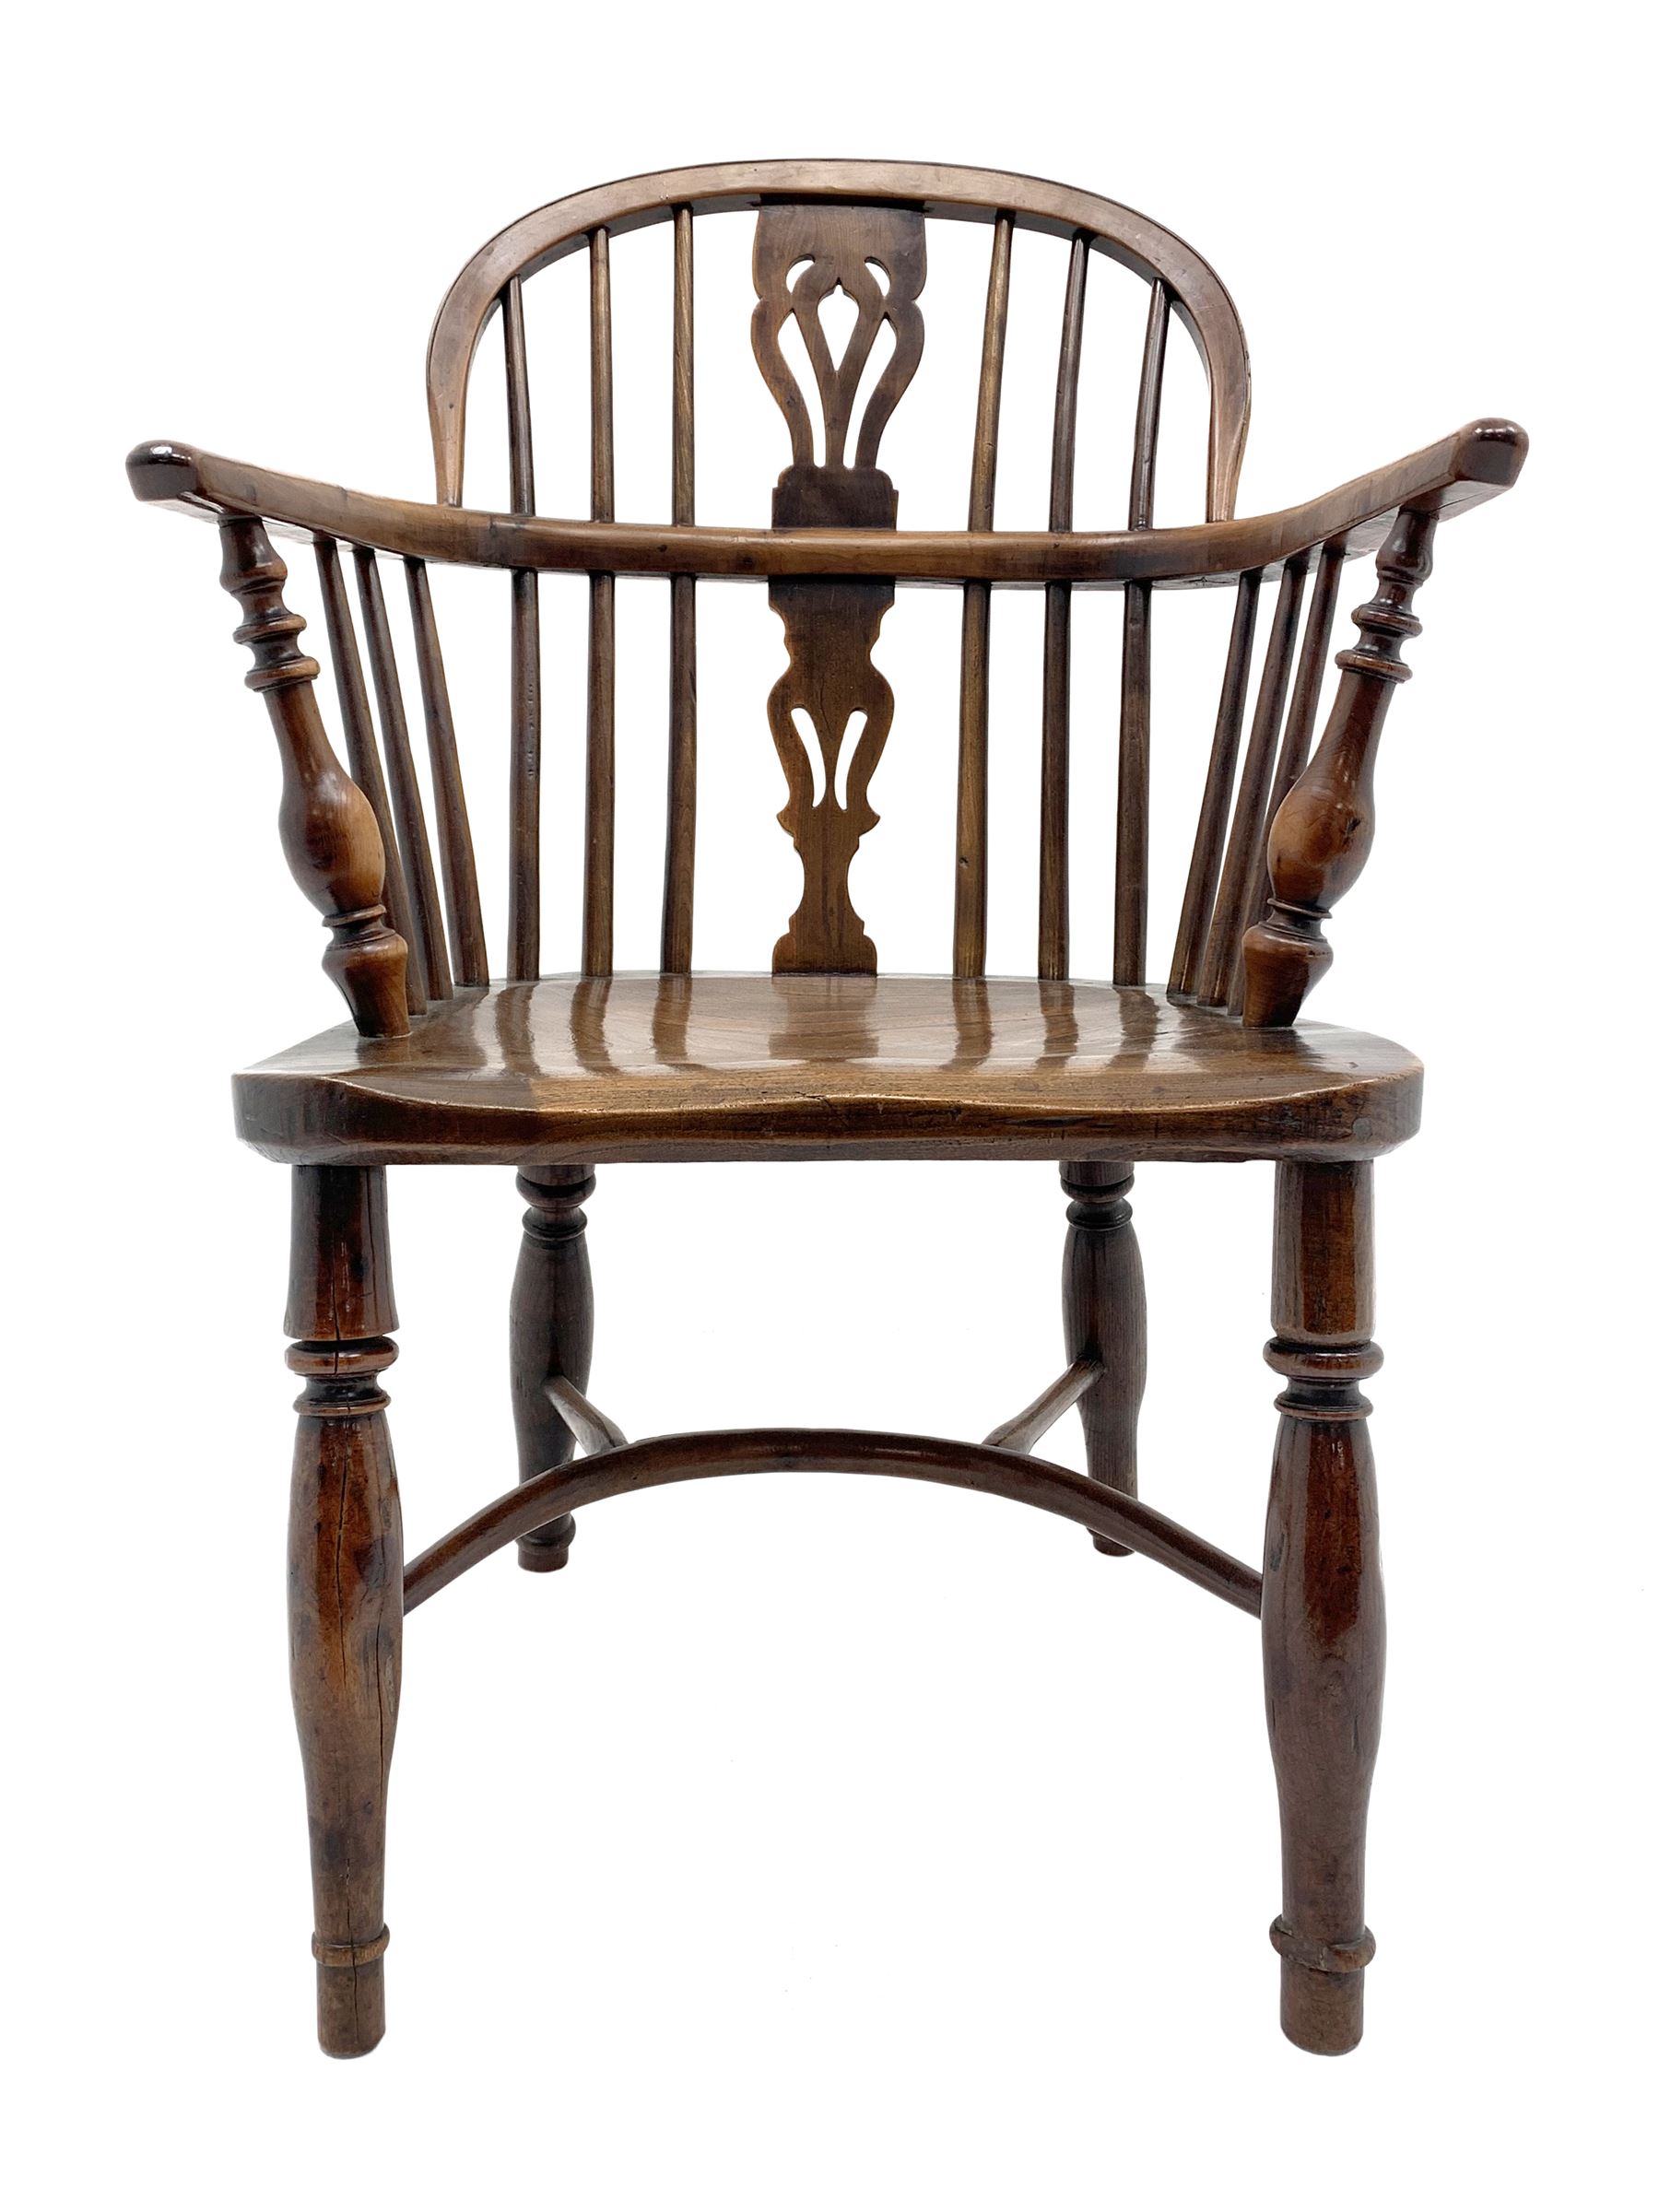 Early 19th century yew wood and elm Windsor armchair